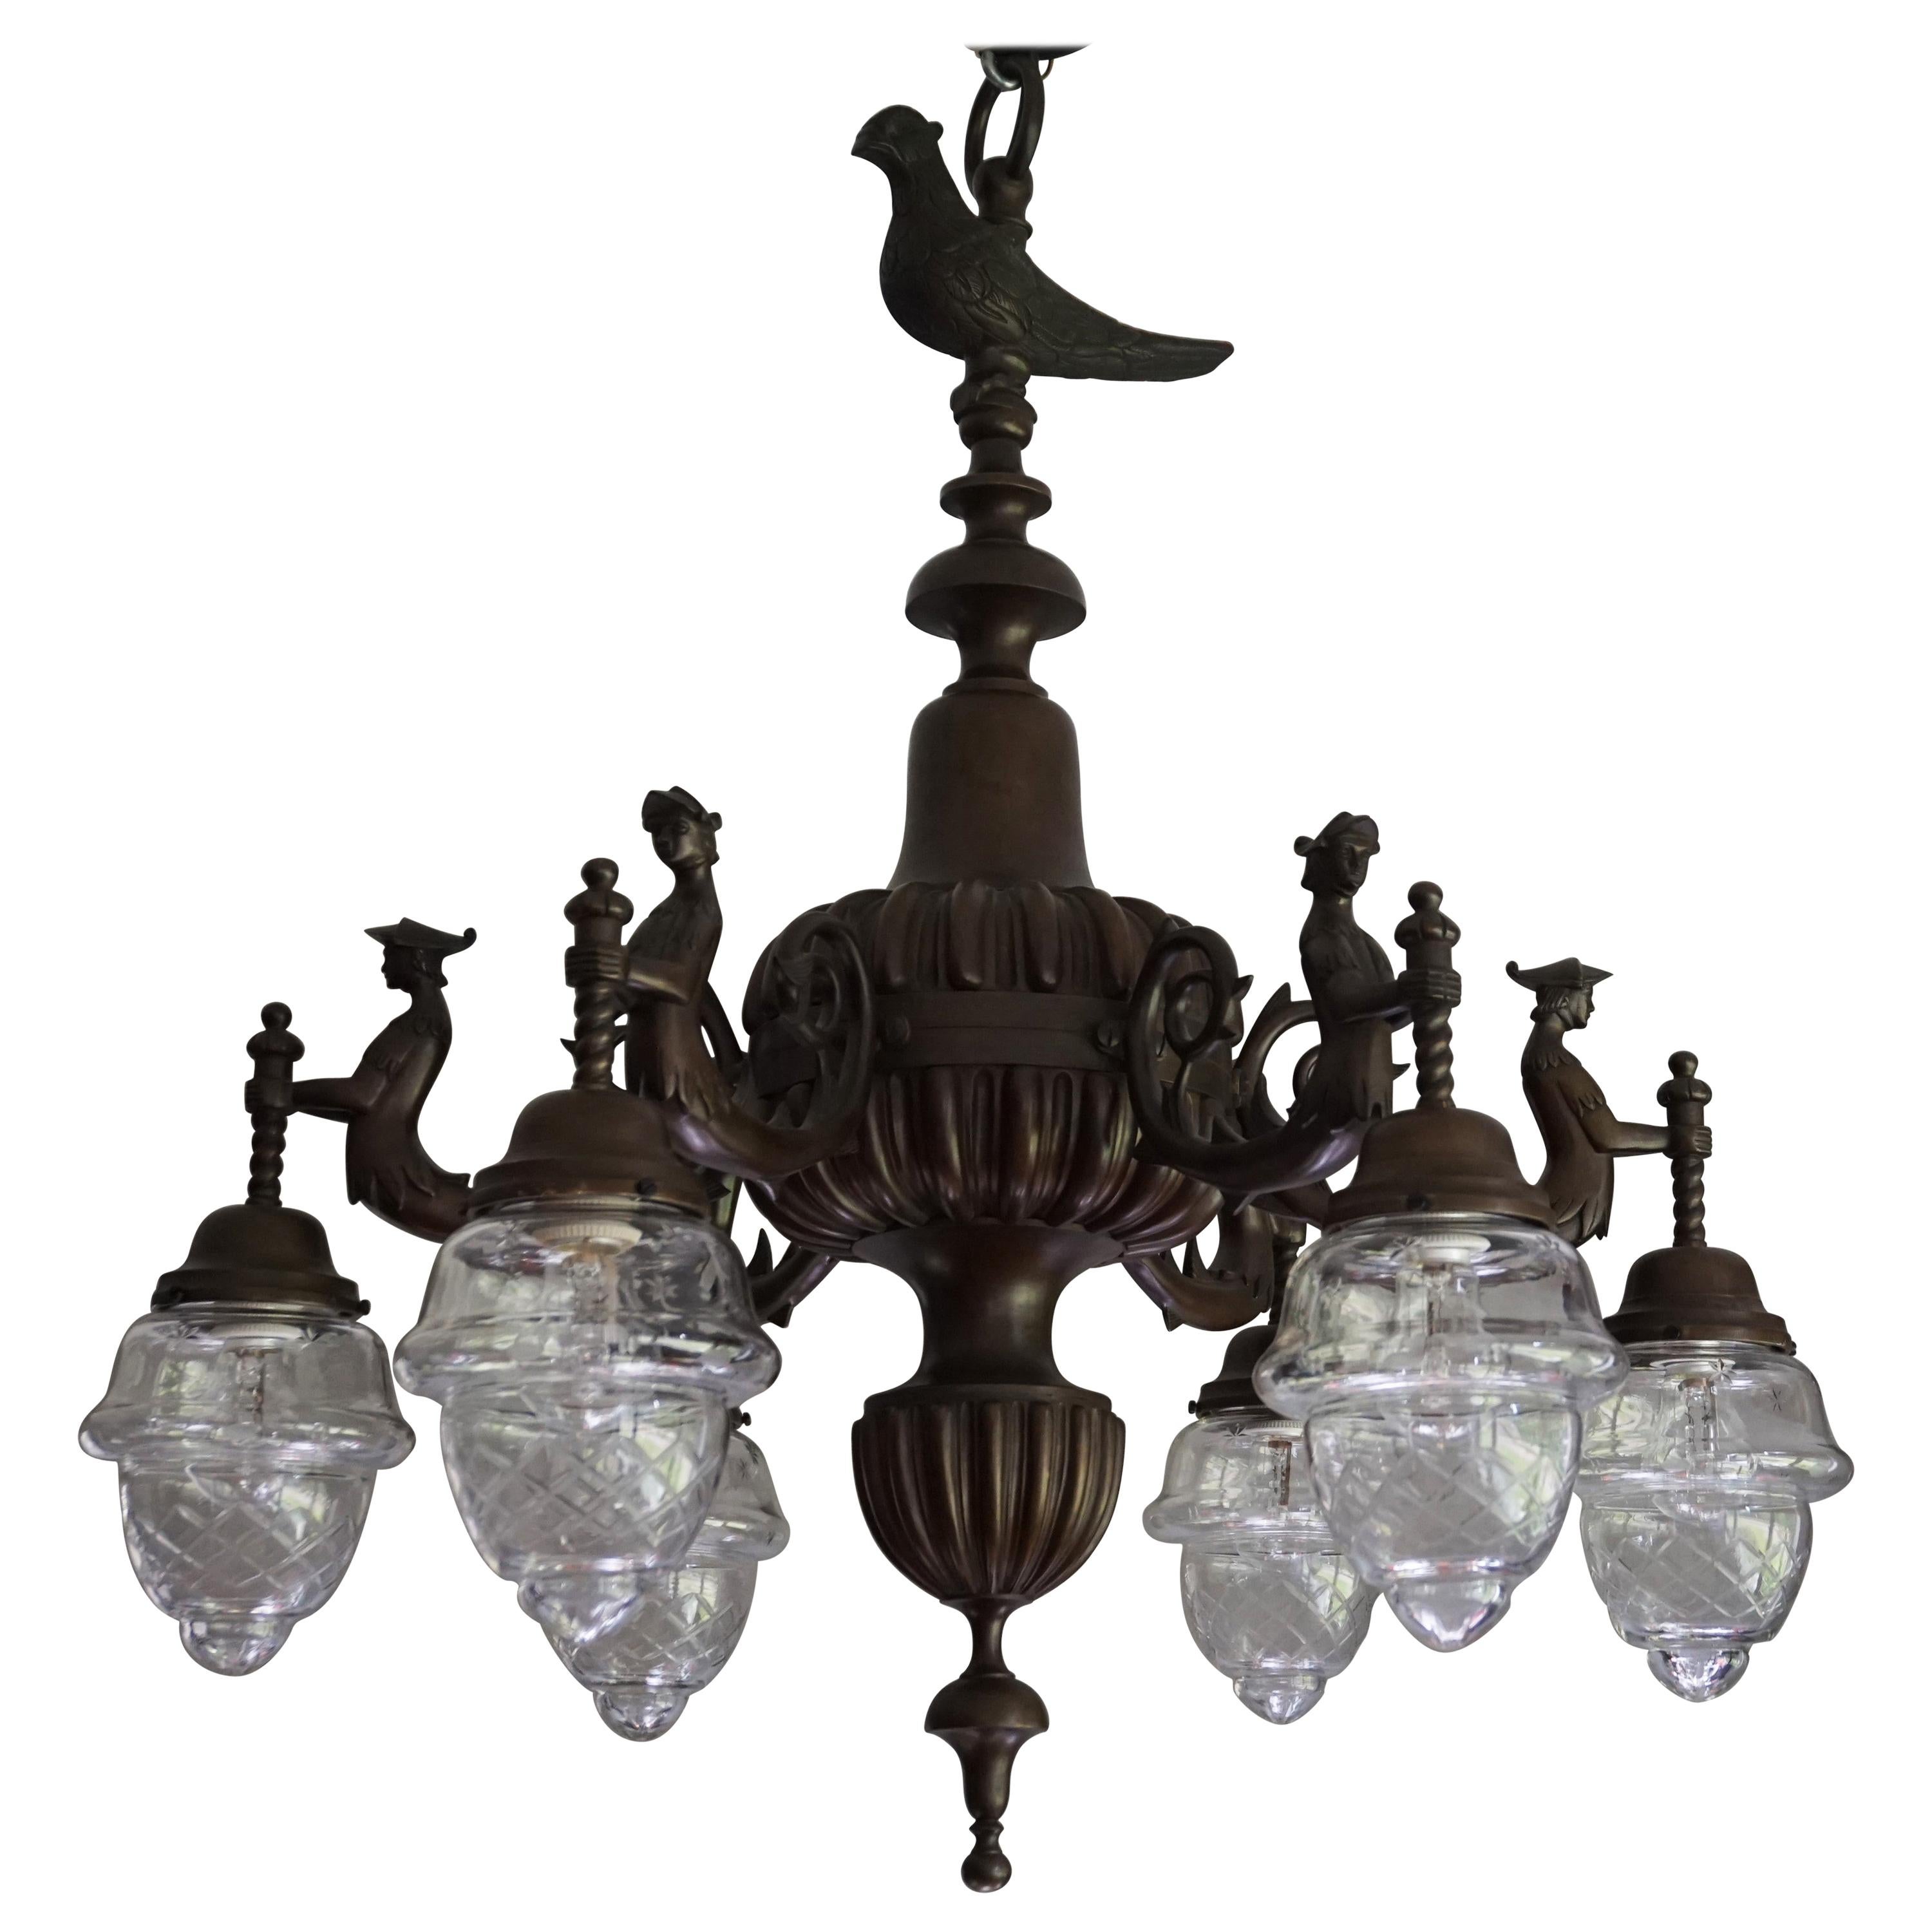 Large Six-Light Bronze Chandelier with Folkore or Fable Hybrid Guard Sculptures